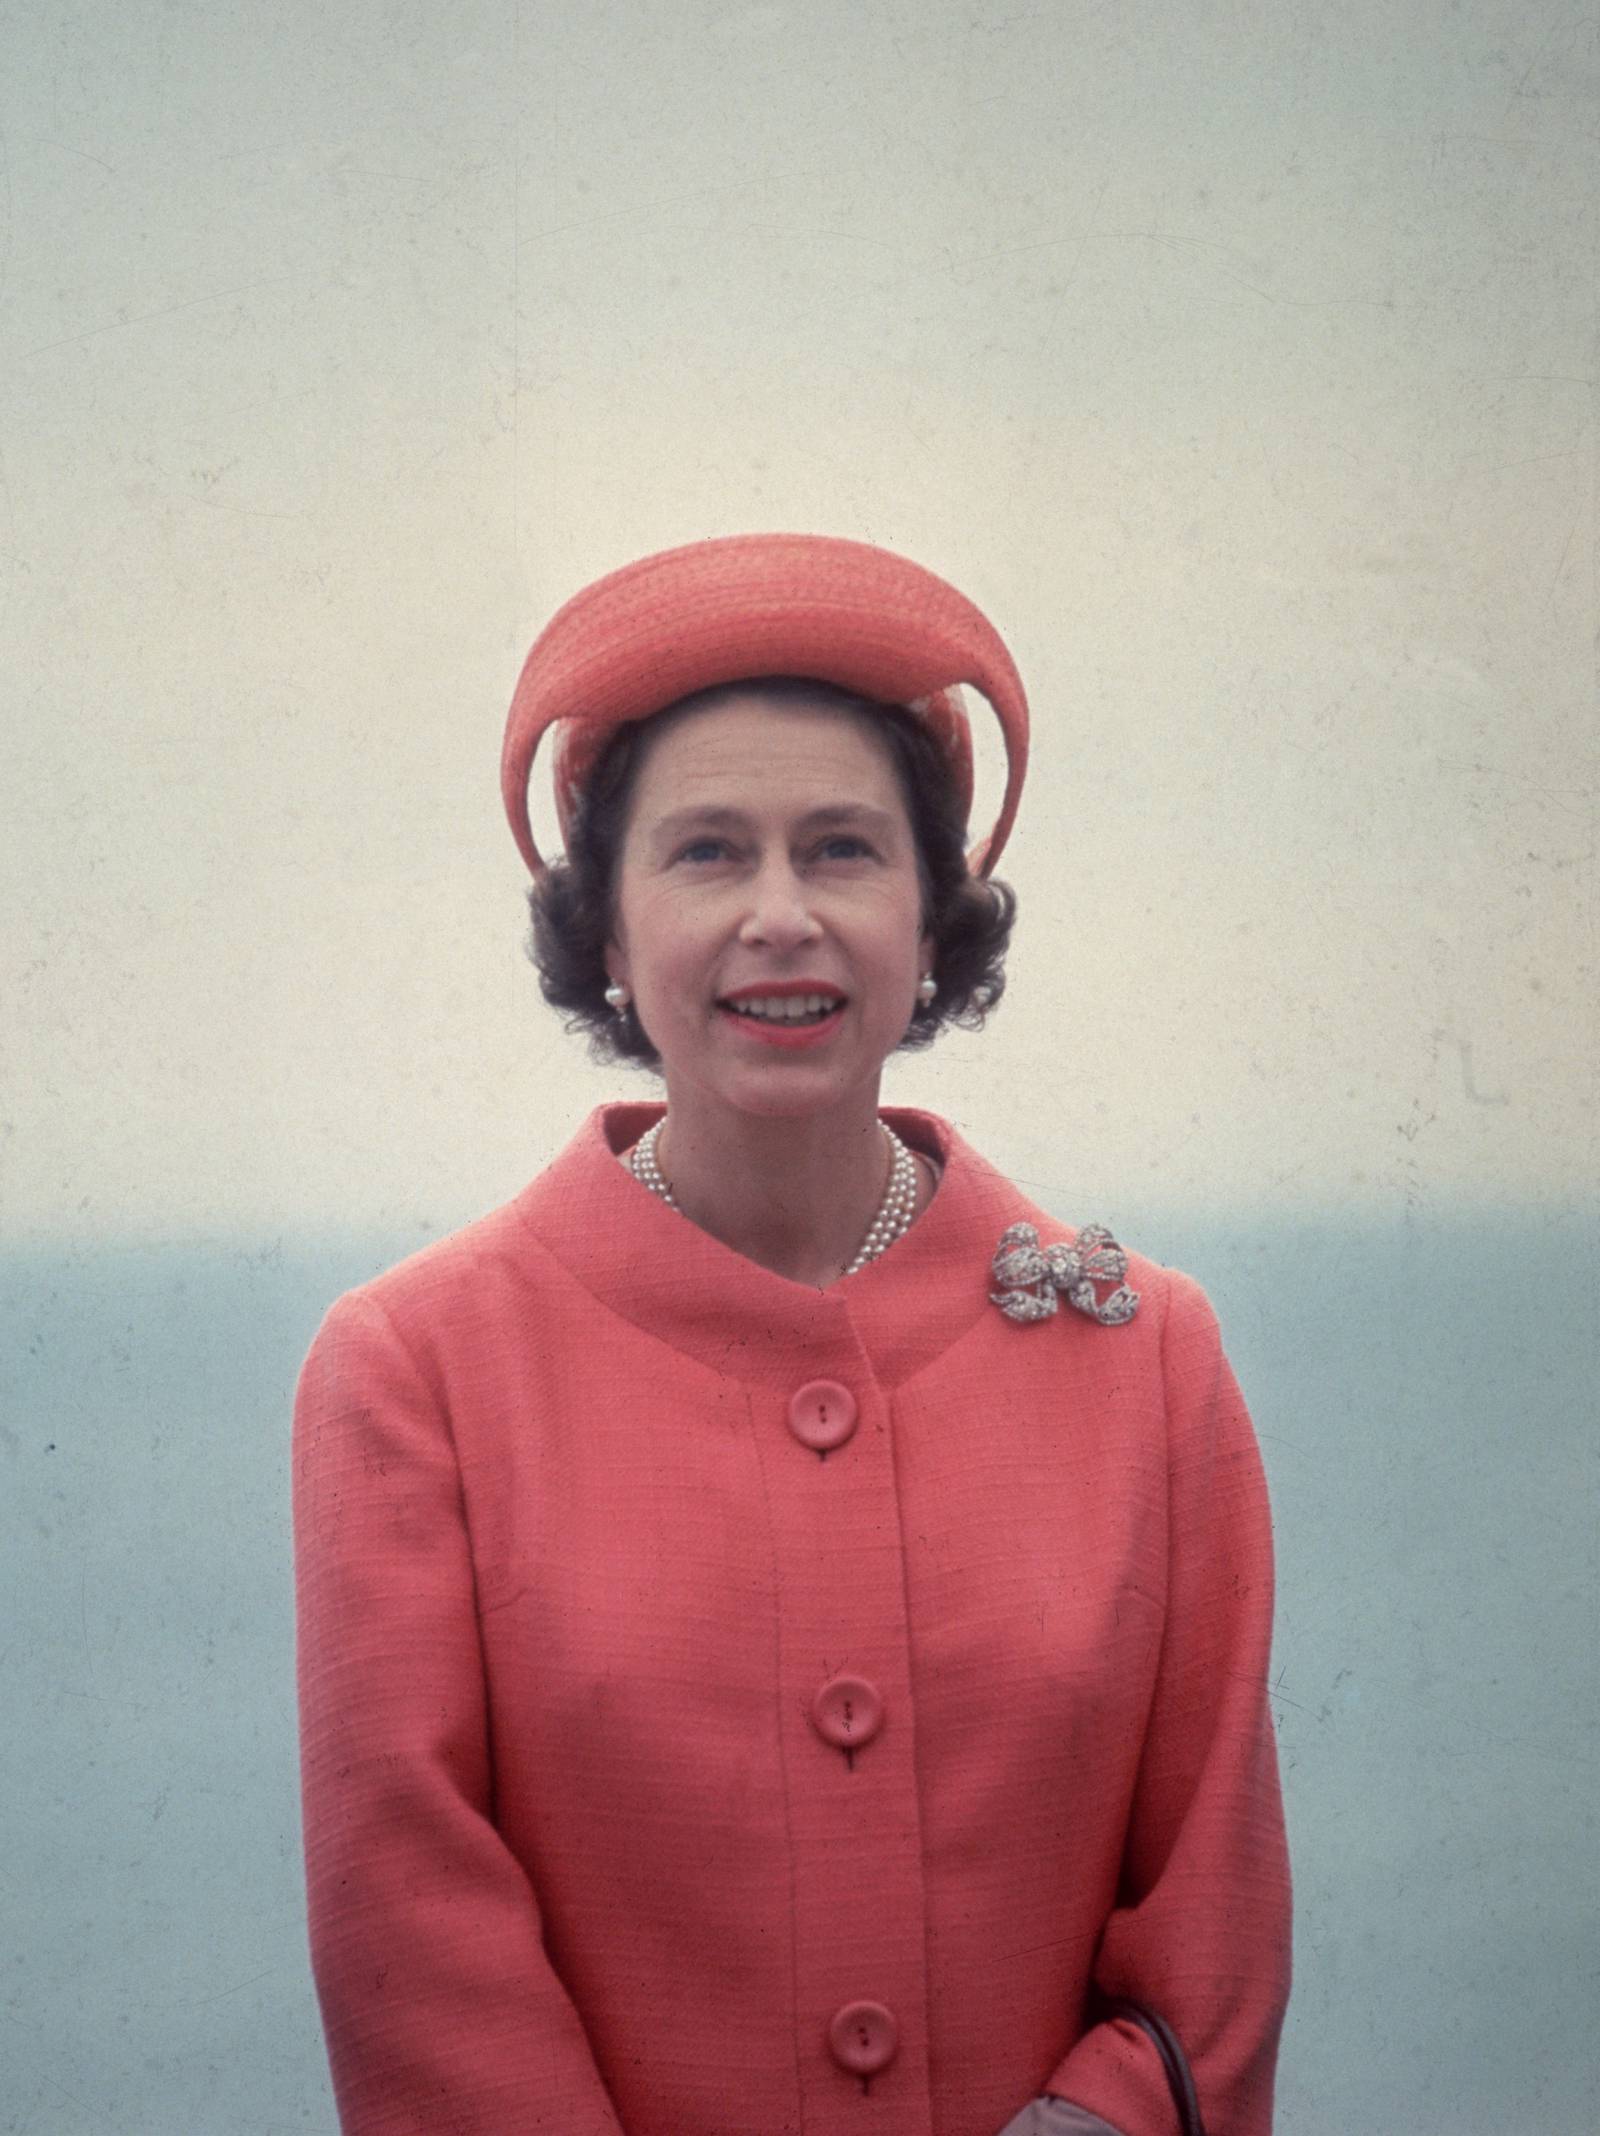 Royal rouge: Queen Elizabeth's red outfits most popular with style fans